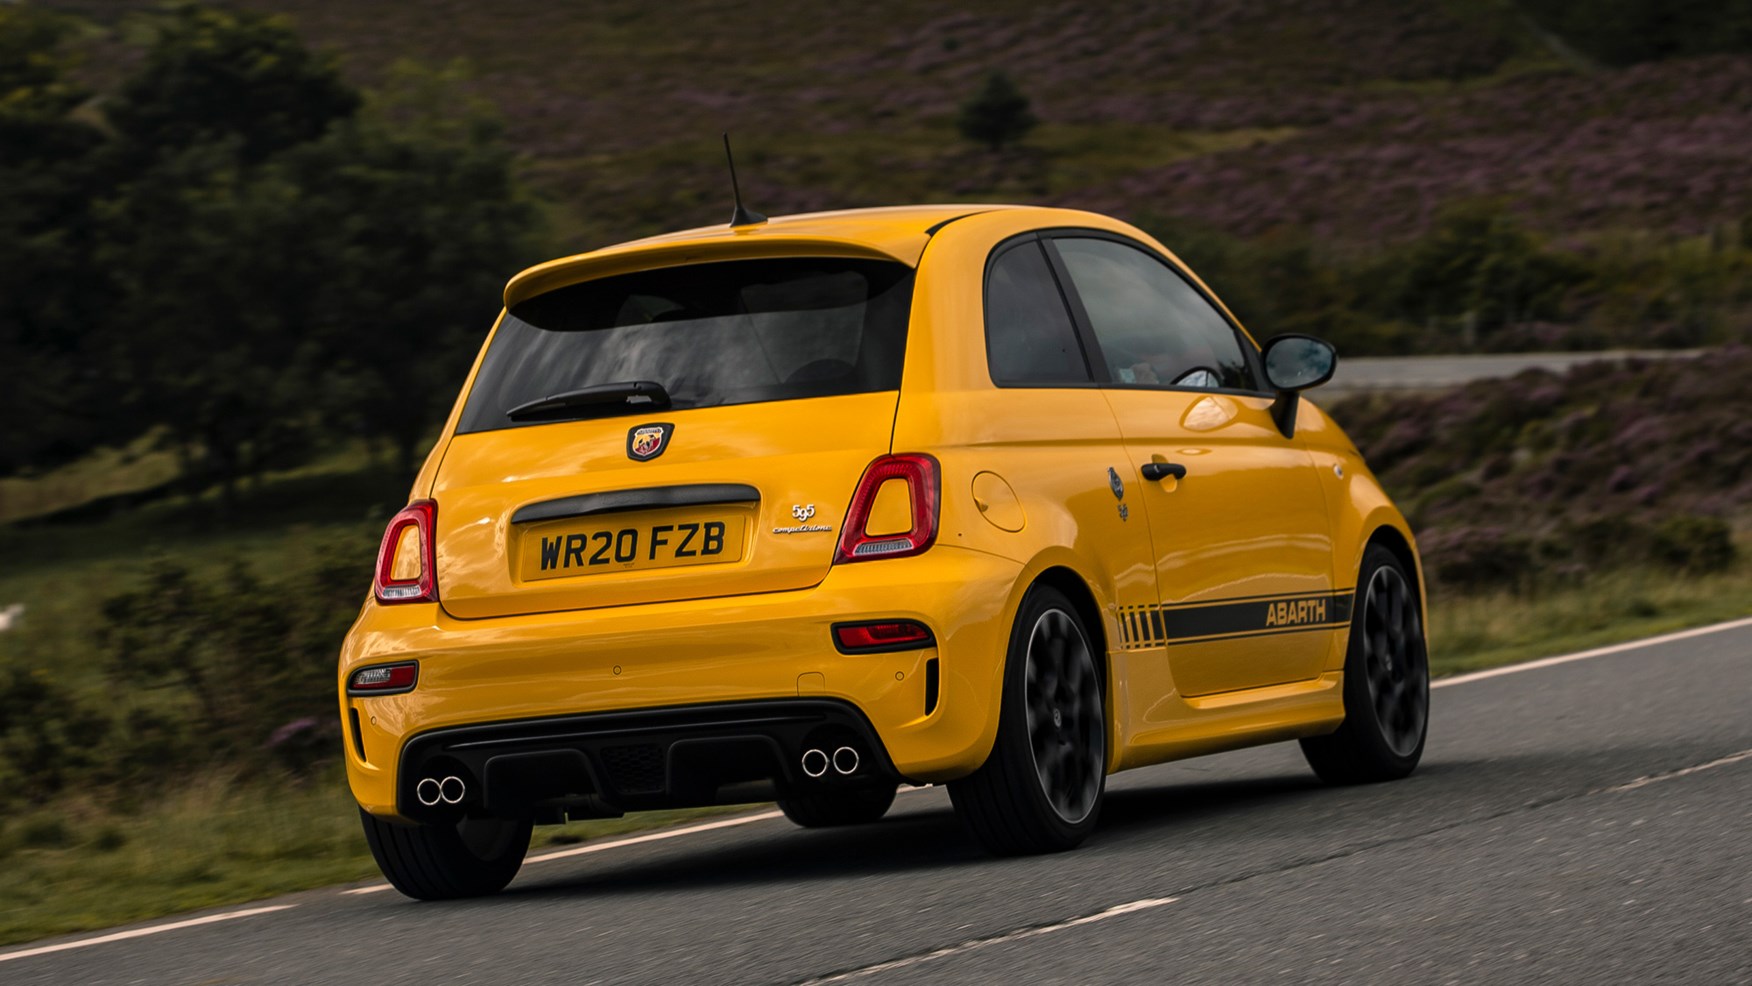 Is the Abarth 595 Competizione the wildest small car that yo